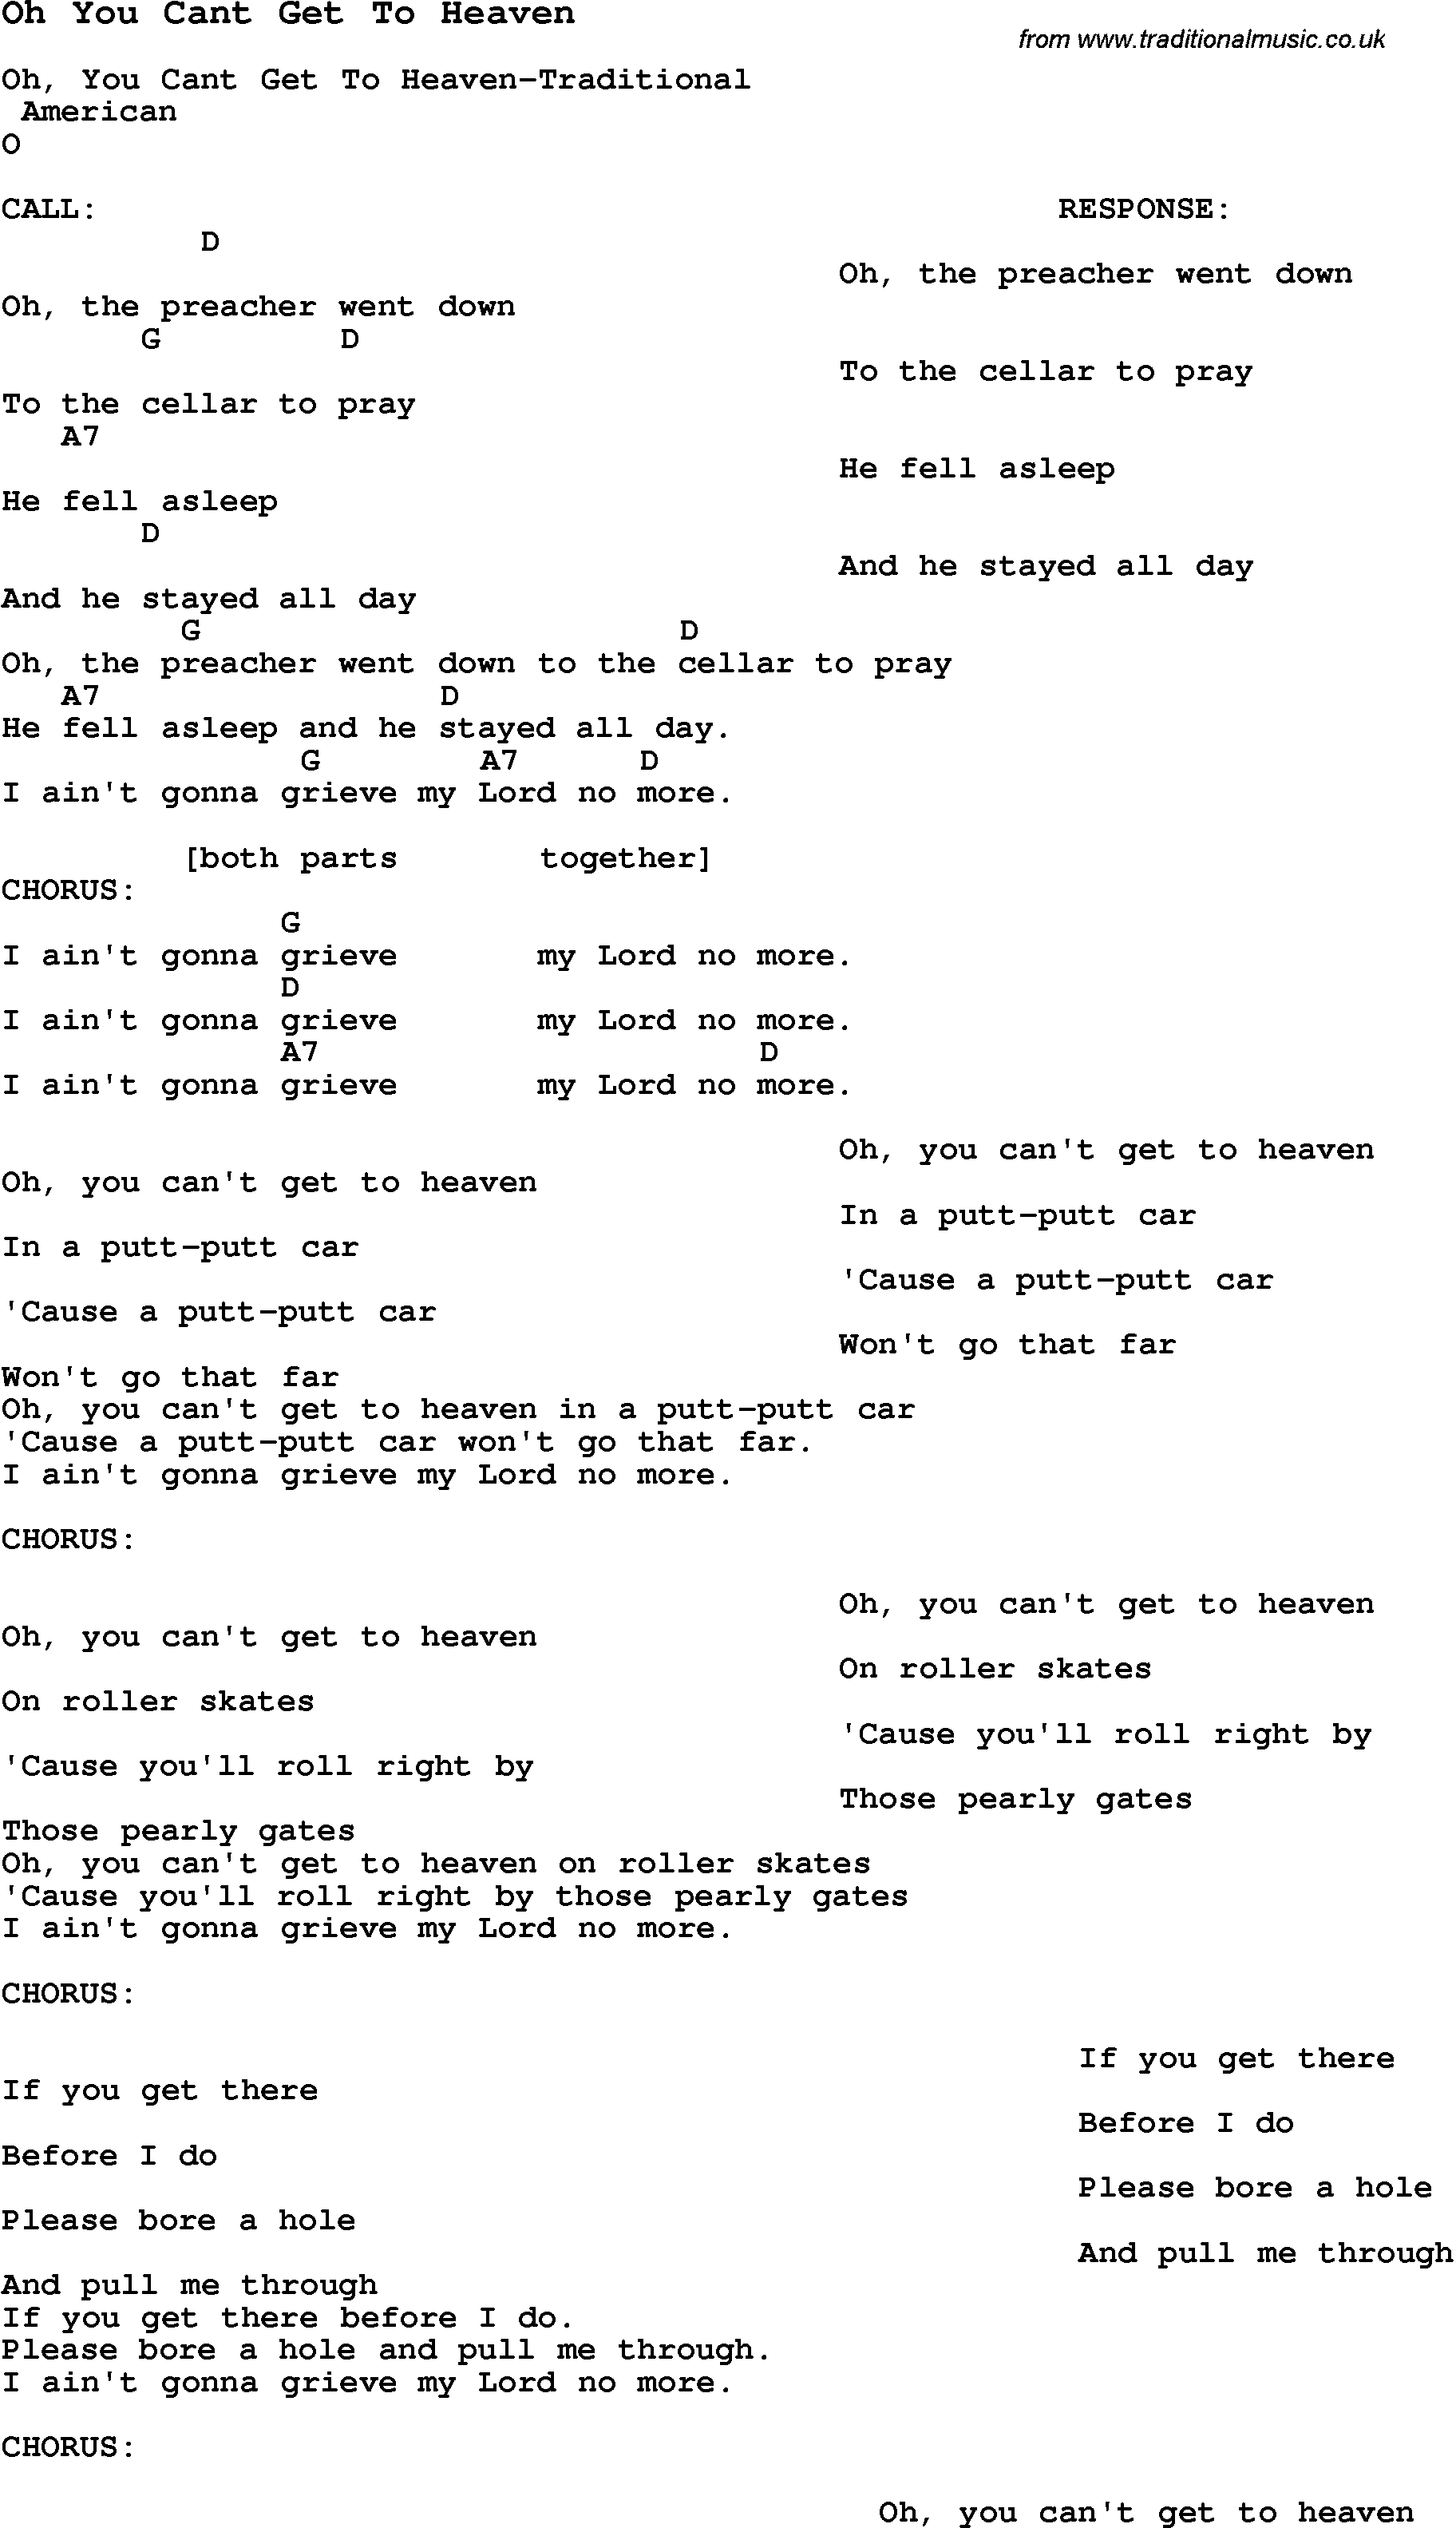 Summer-Camp Song, Oh You Cant Get To Heaven, with lyrics and chords for Ukulele, Guitar Banjo etc.